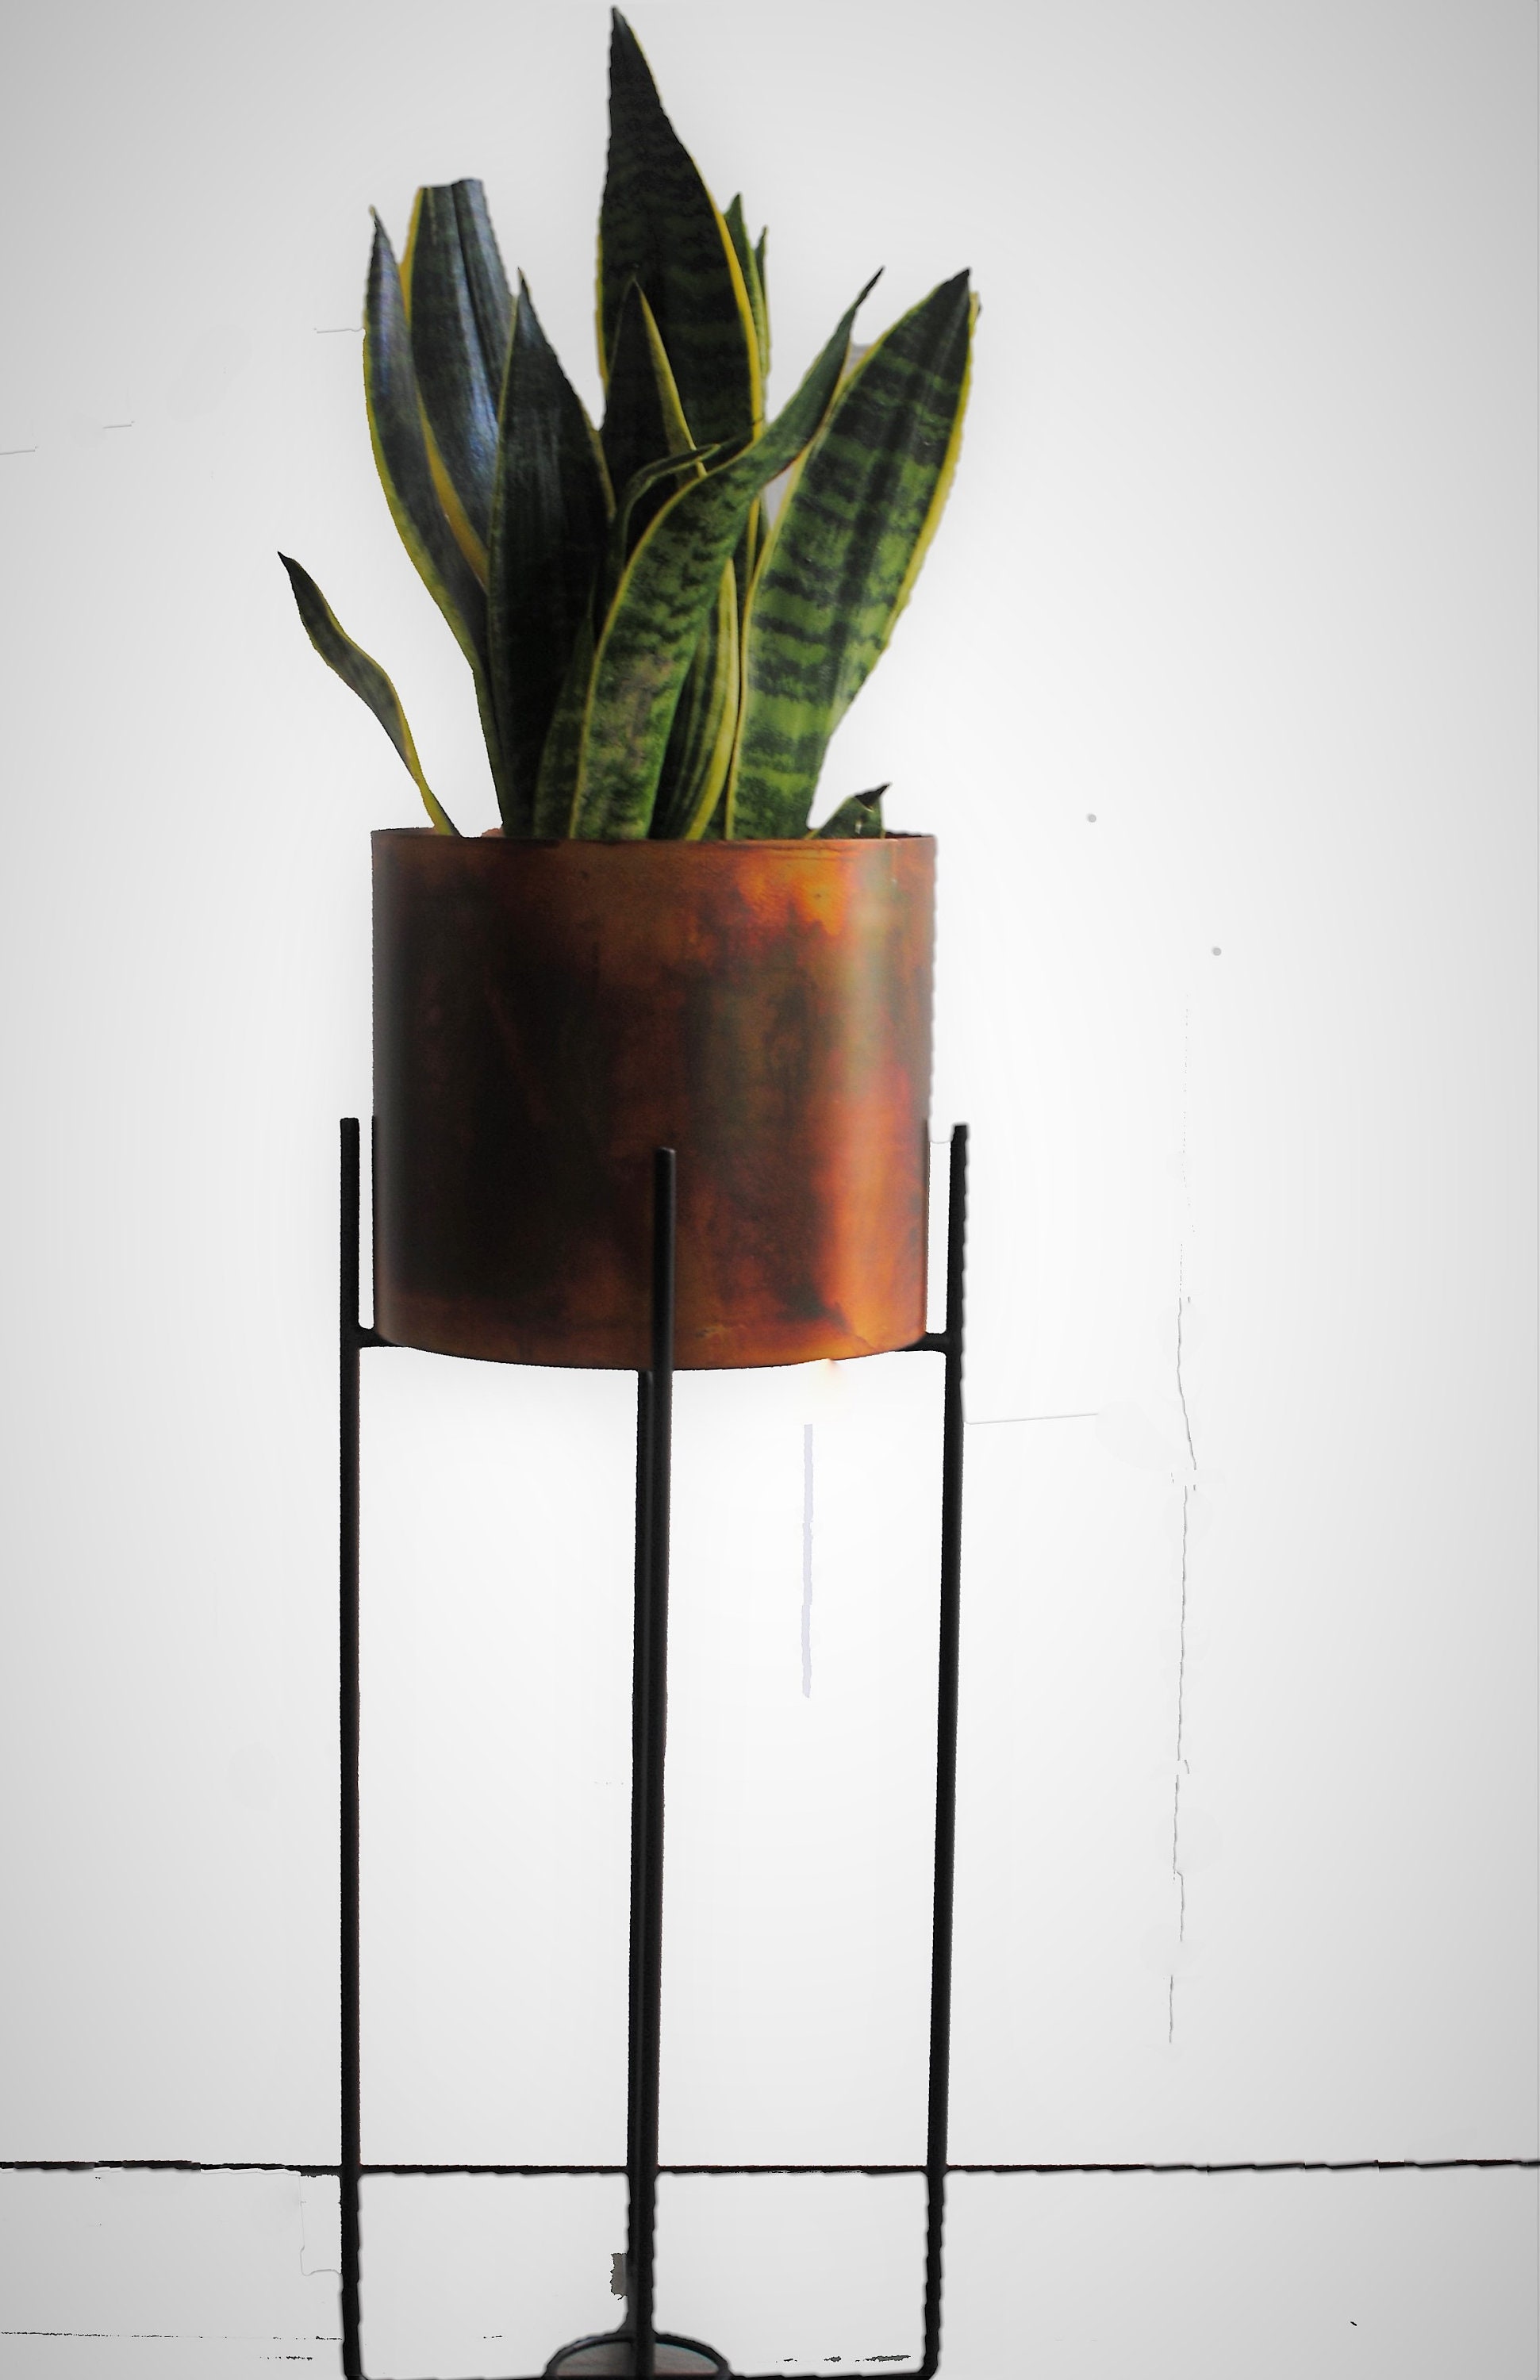 Big Size of Reclaimed Wooden Planter with Black Metal Stand